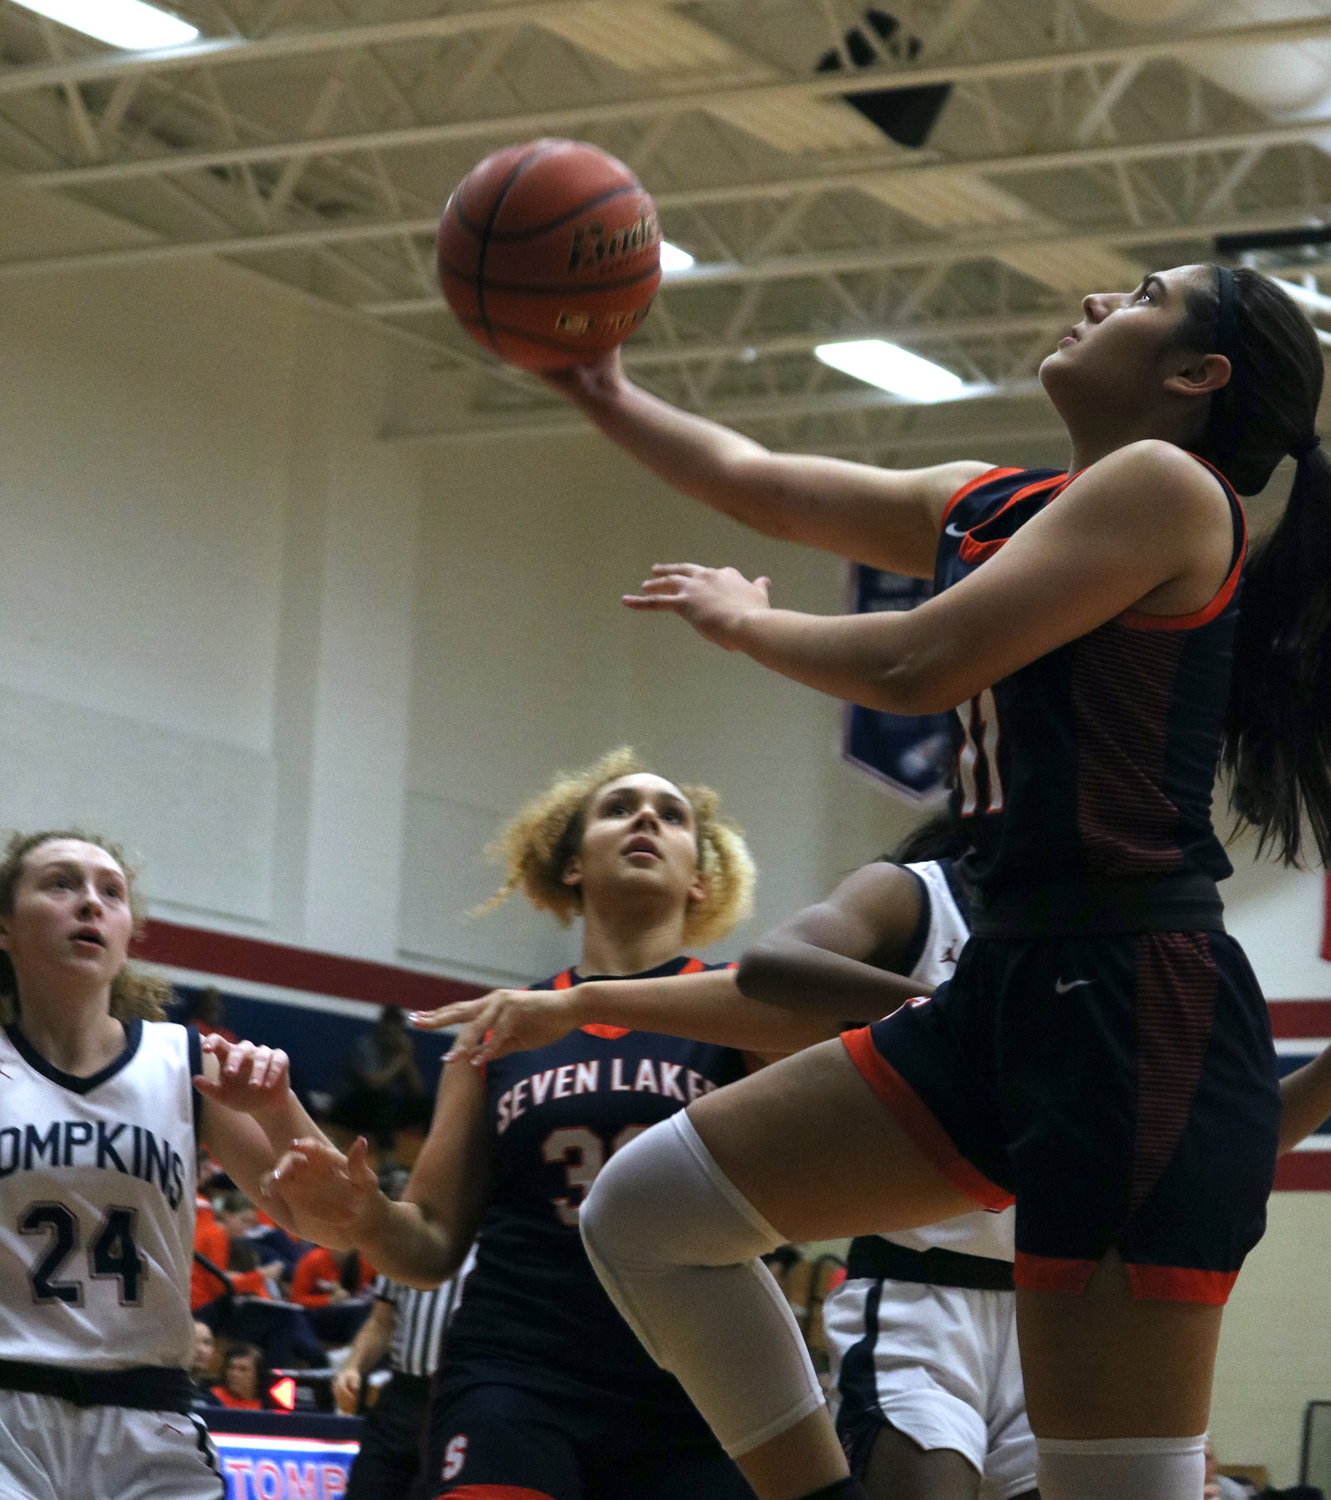 Macy Spencer shoots a floater during Tuesday’s District 19-6A game between Tompkins and Seven Lakes at the Tompkins gym.